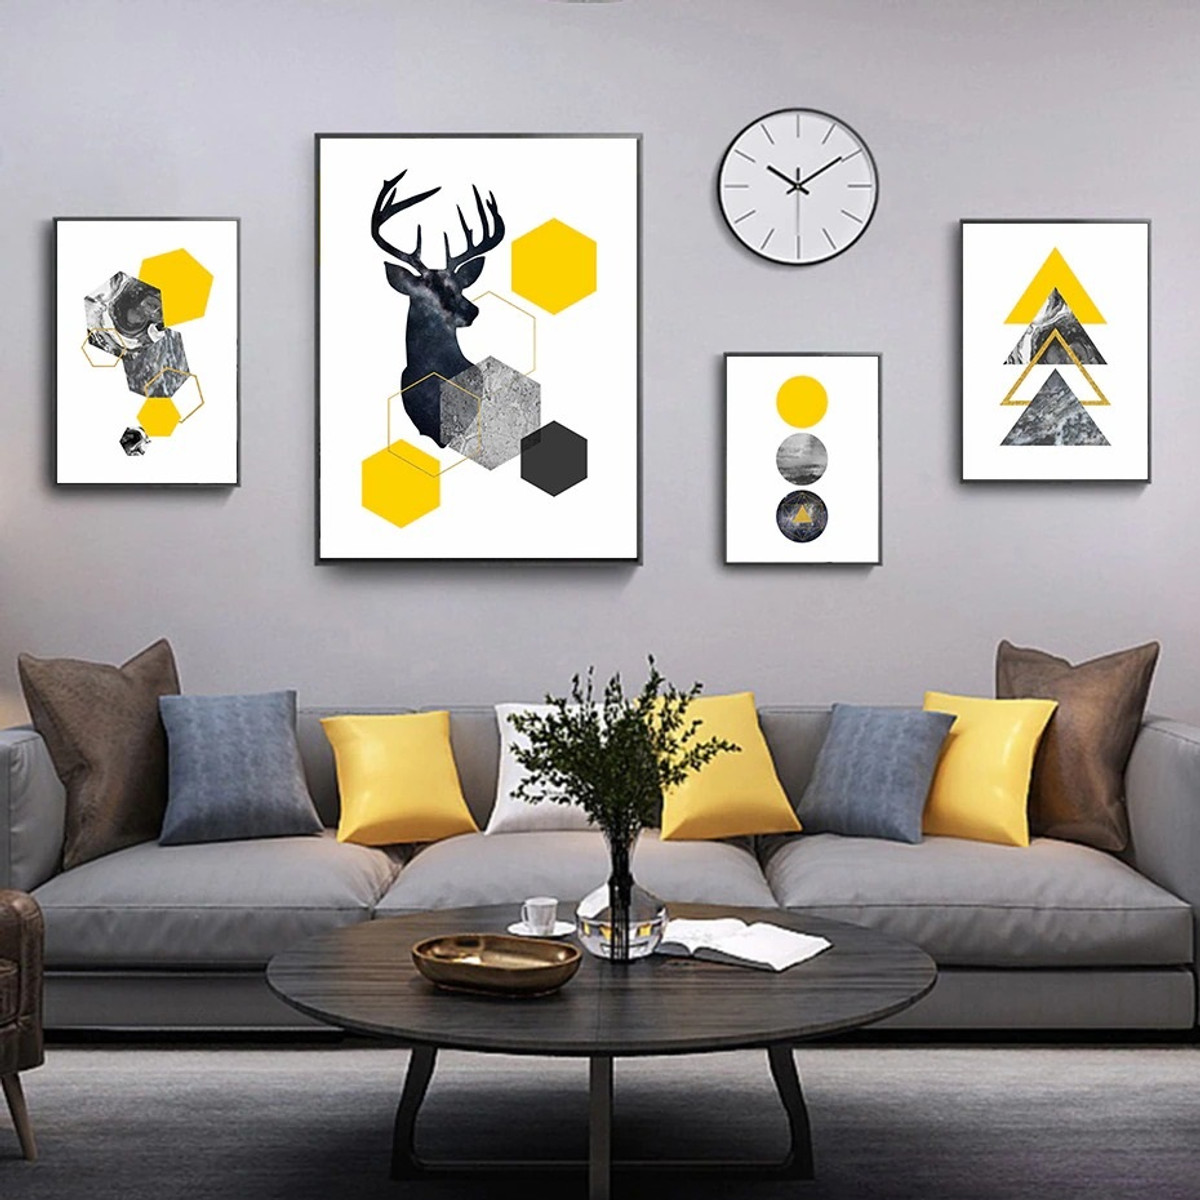 Blemish Reindeer Circles Nordic Wall Animal Painting Photograph Geometric Canvas Print 4 Multi Piece for Home Drape